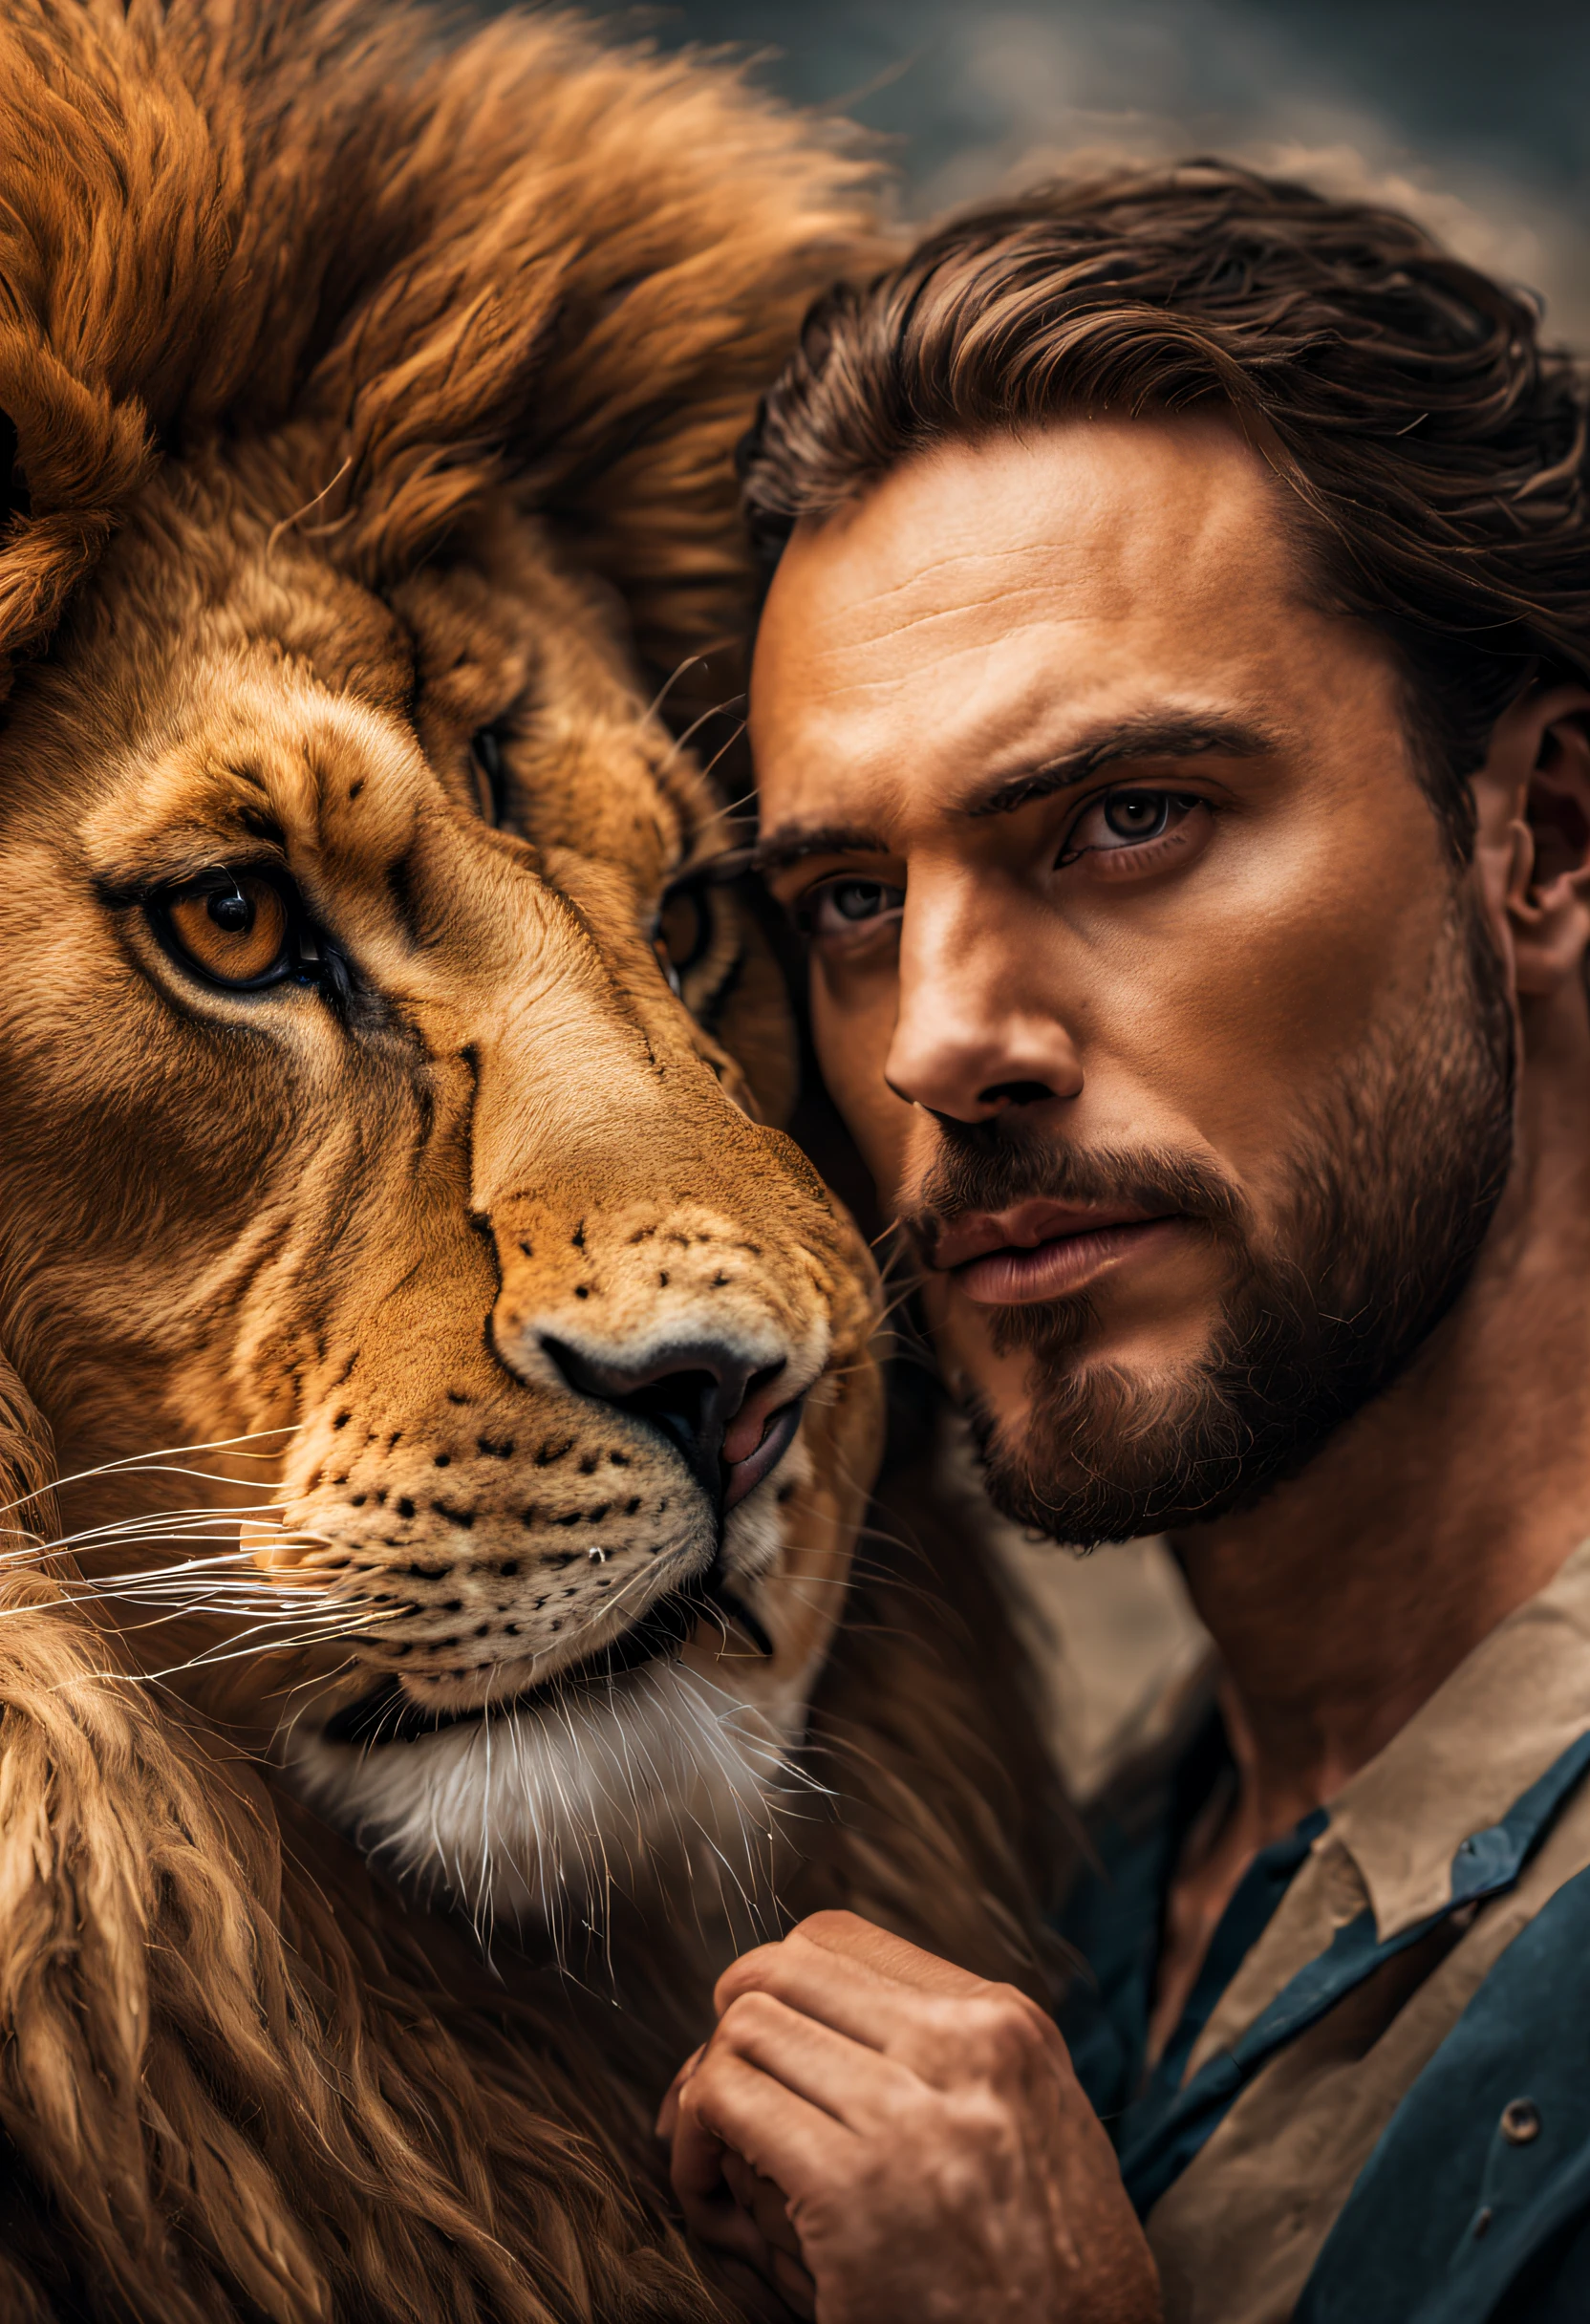 A majestic man and lion, double contact， merge portrait